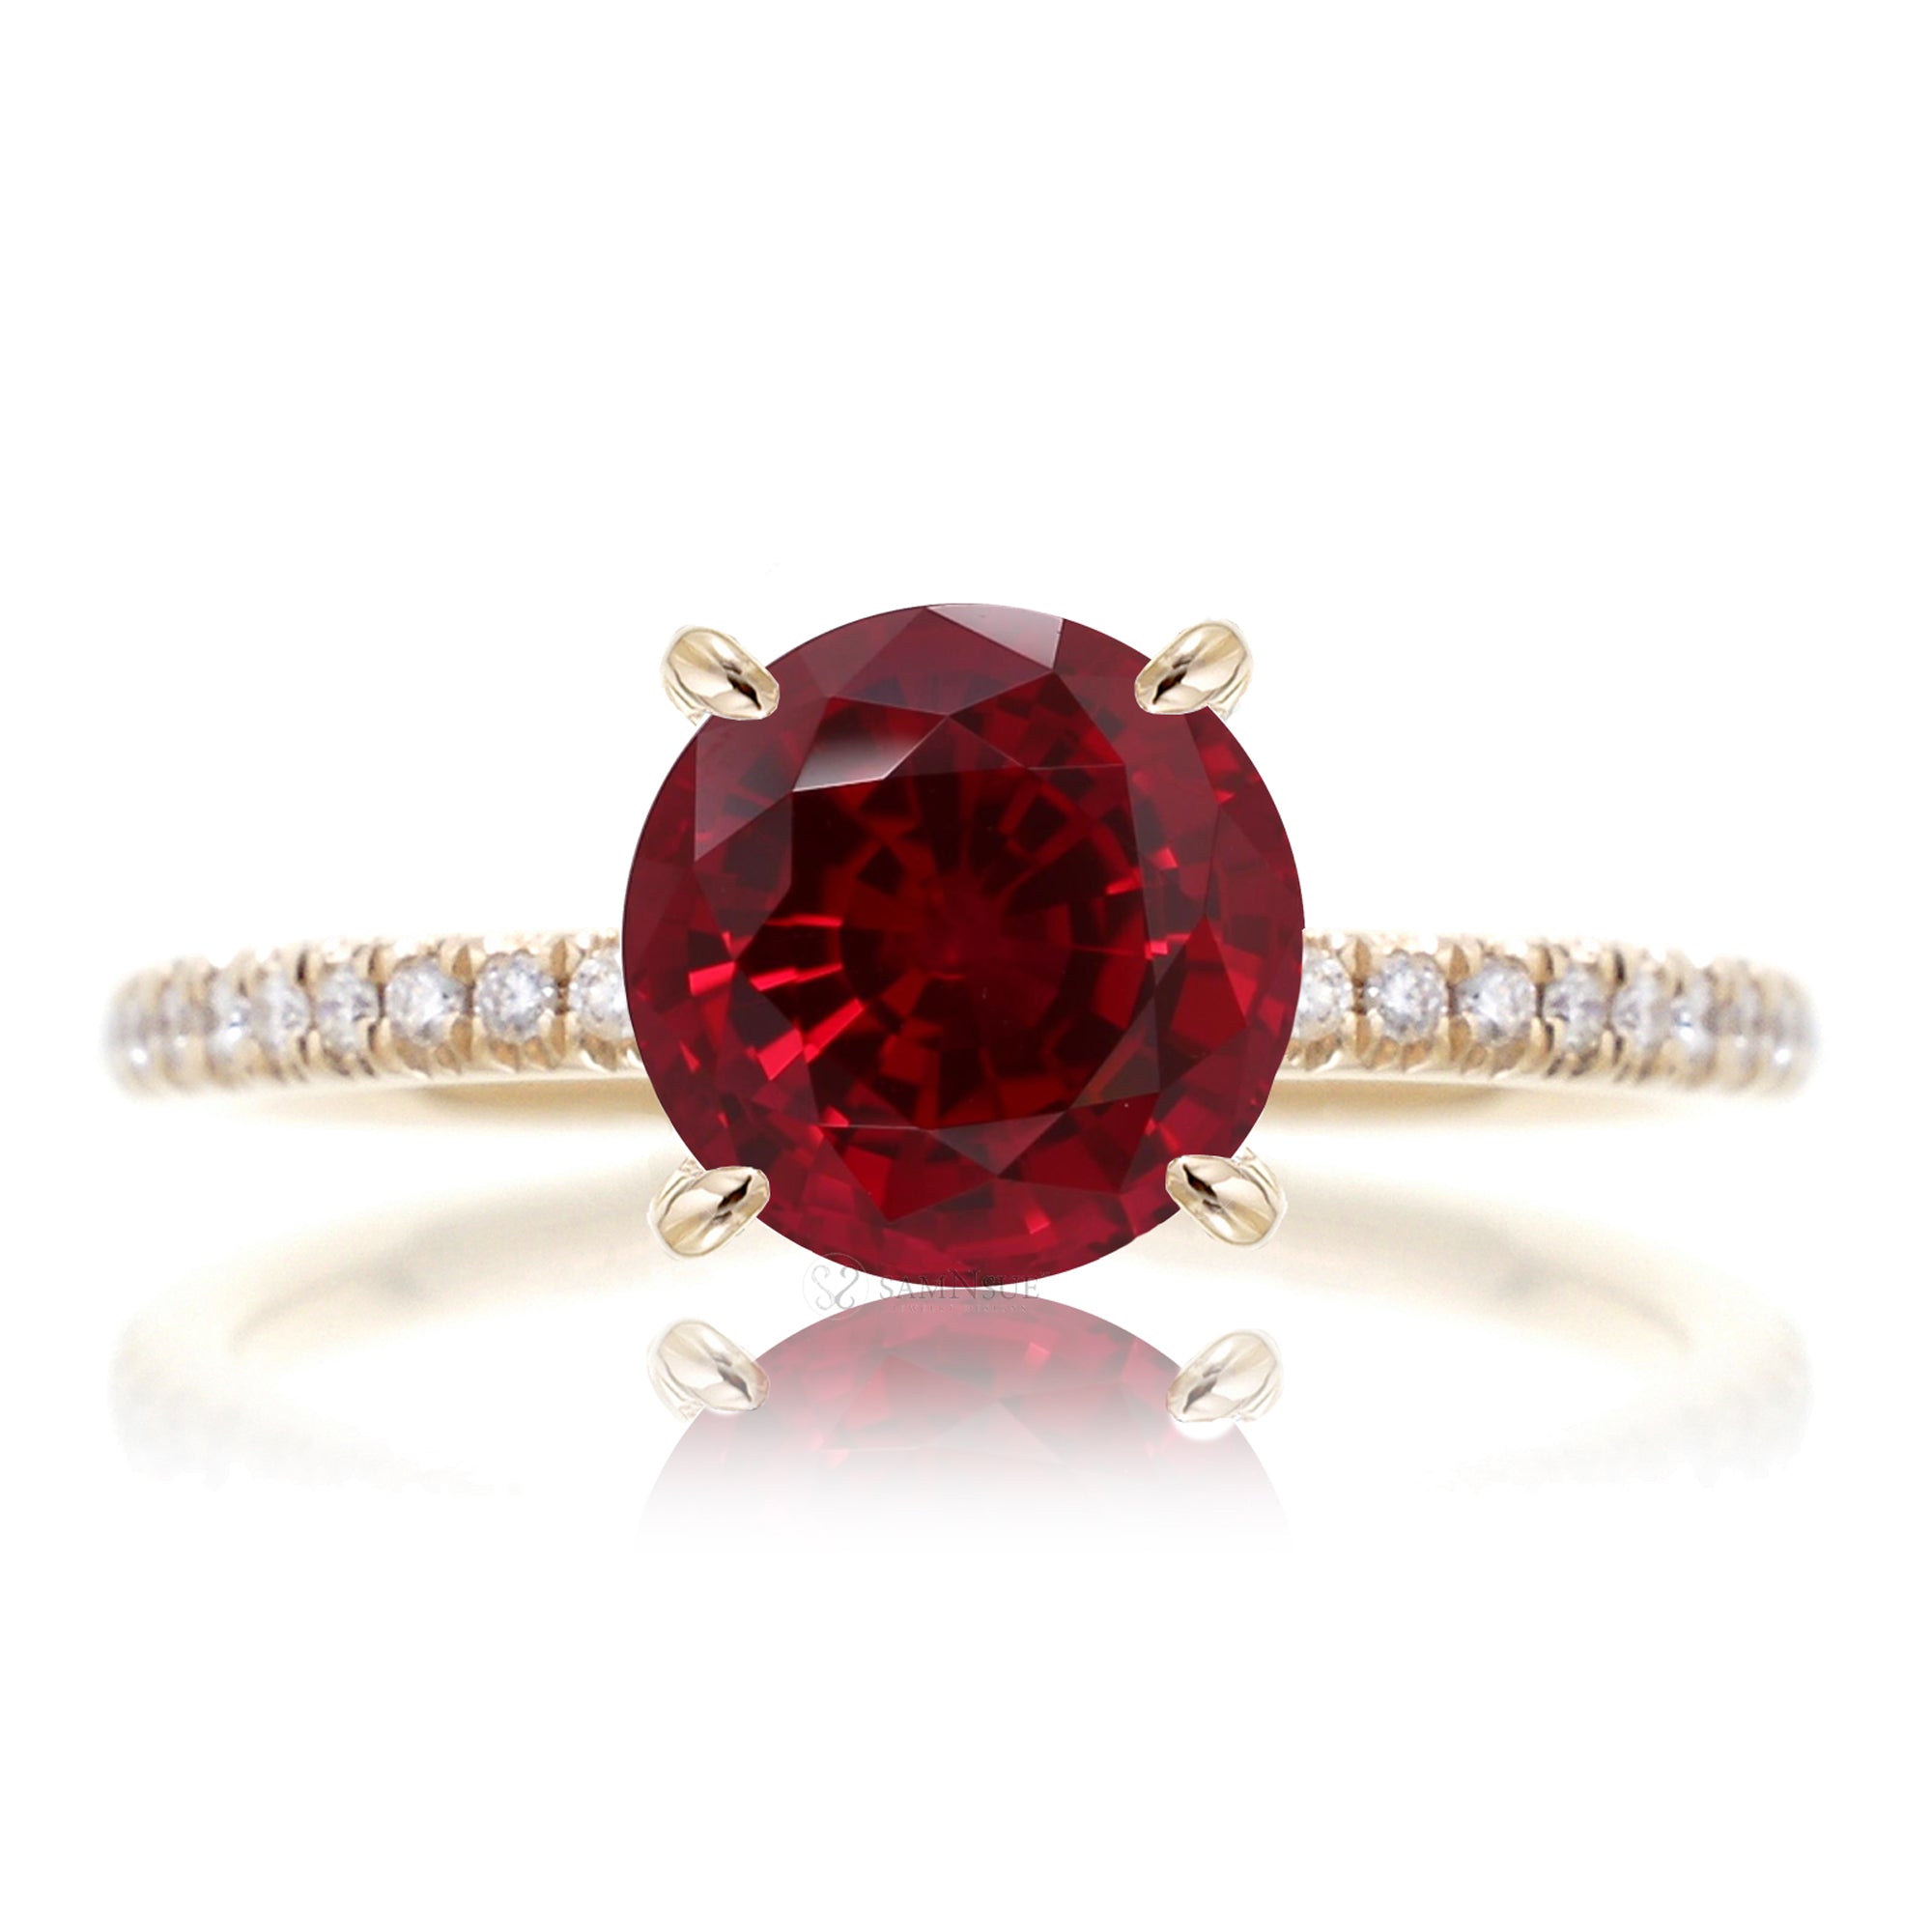 Round cut lab ruby engagement ring diamond band yellow gold - the Ava